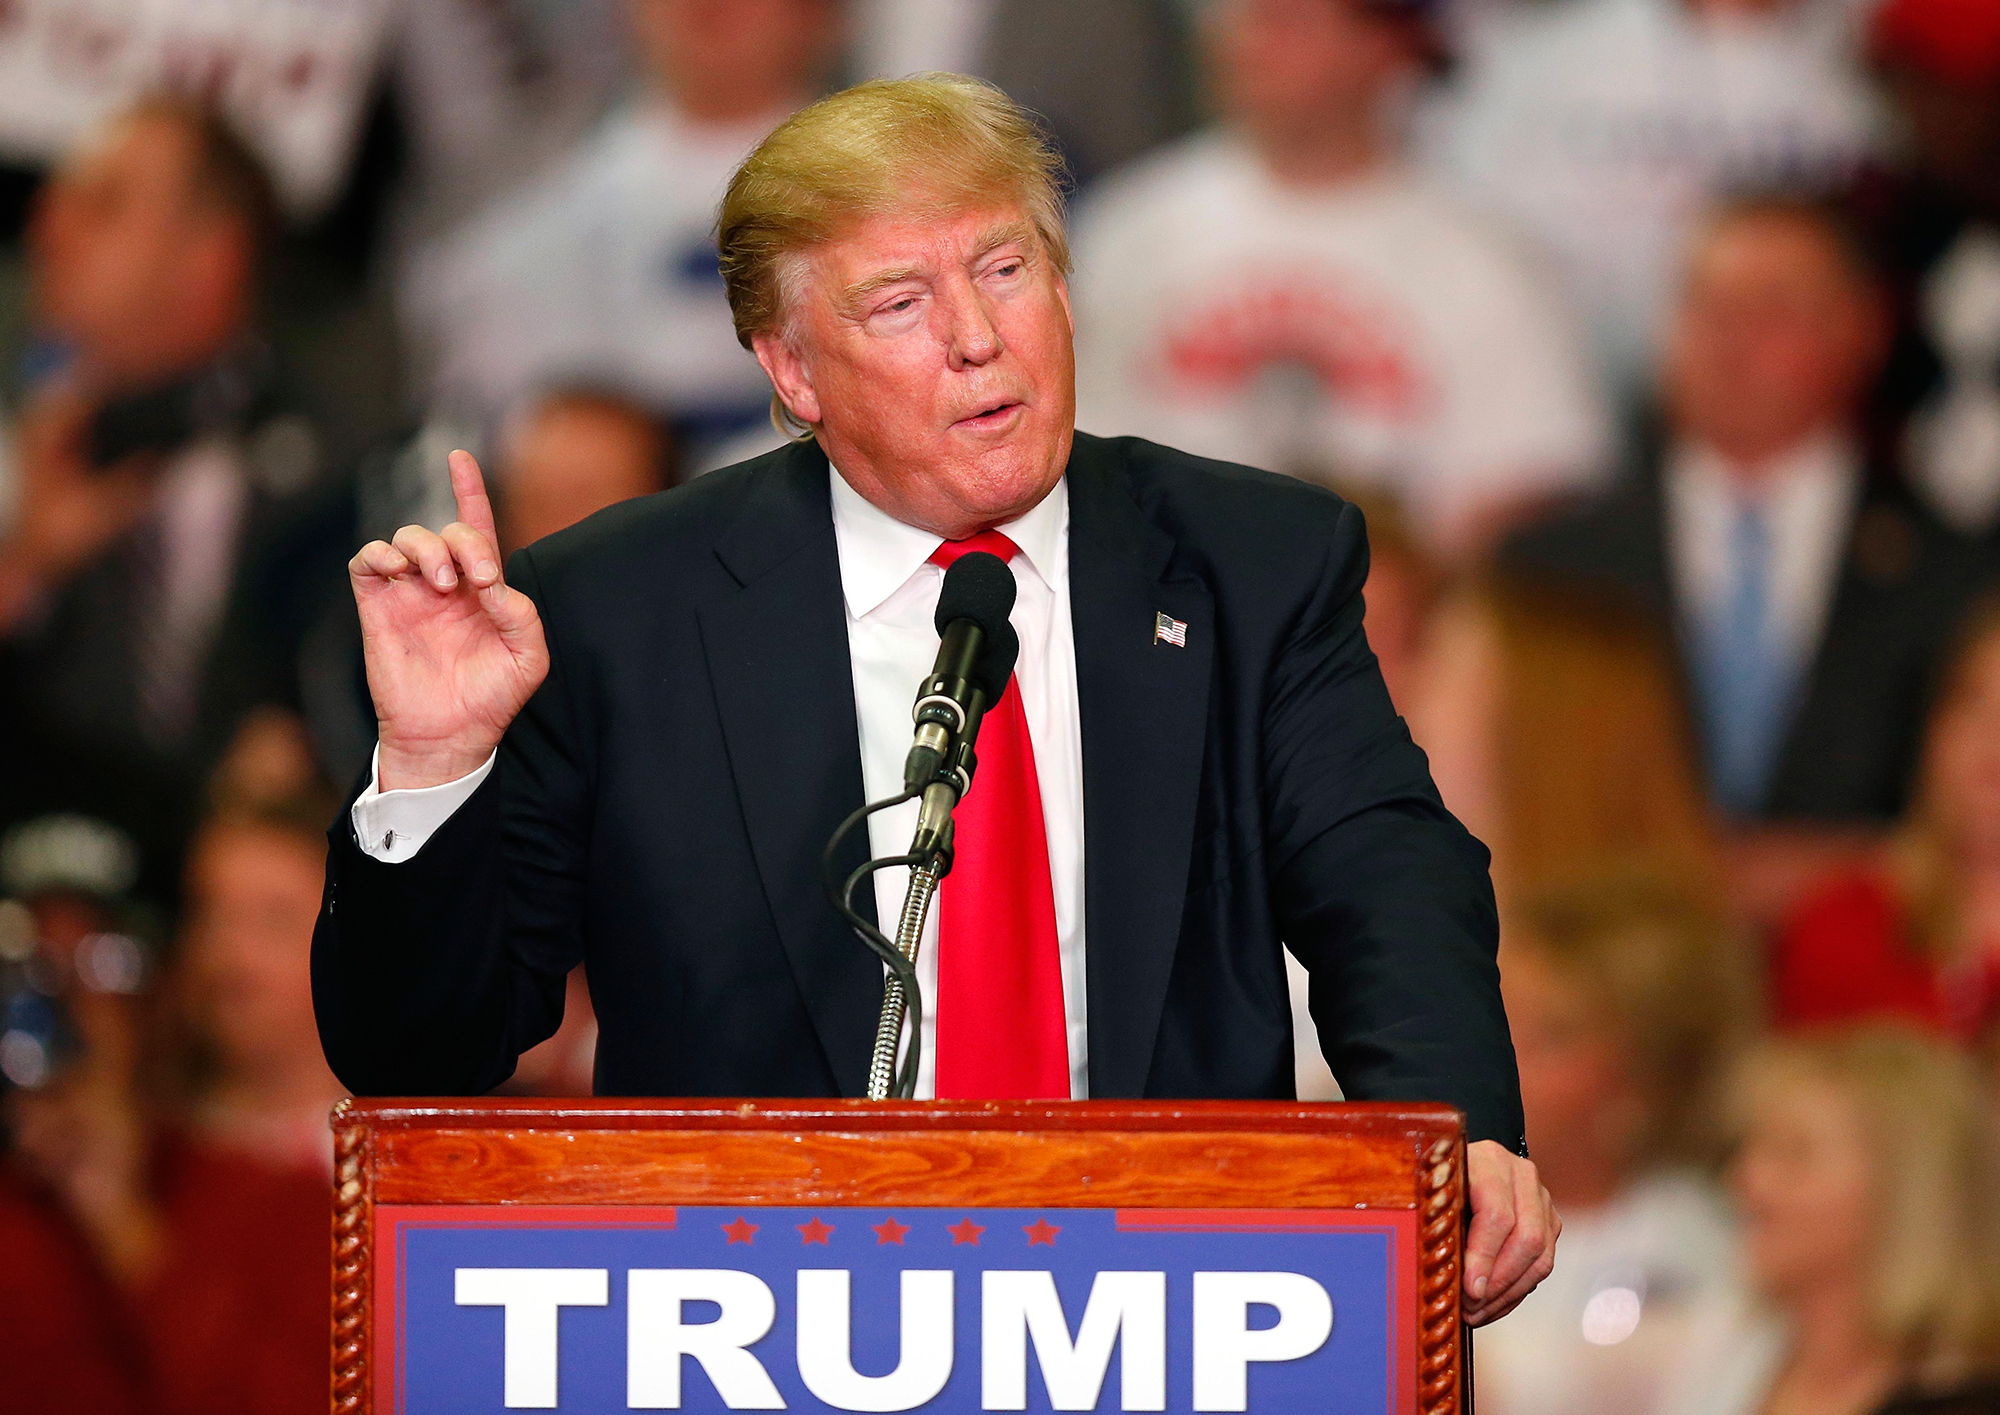 Donald Trump speaks during a campaign rally on March 7, 2016, in Madison, Miss.